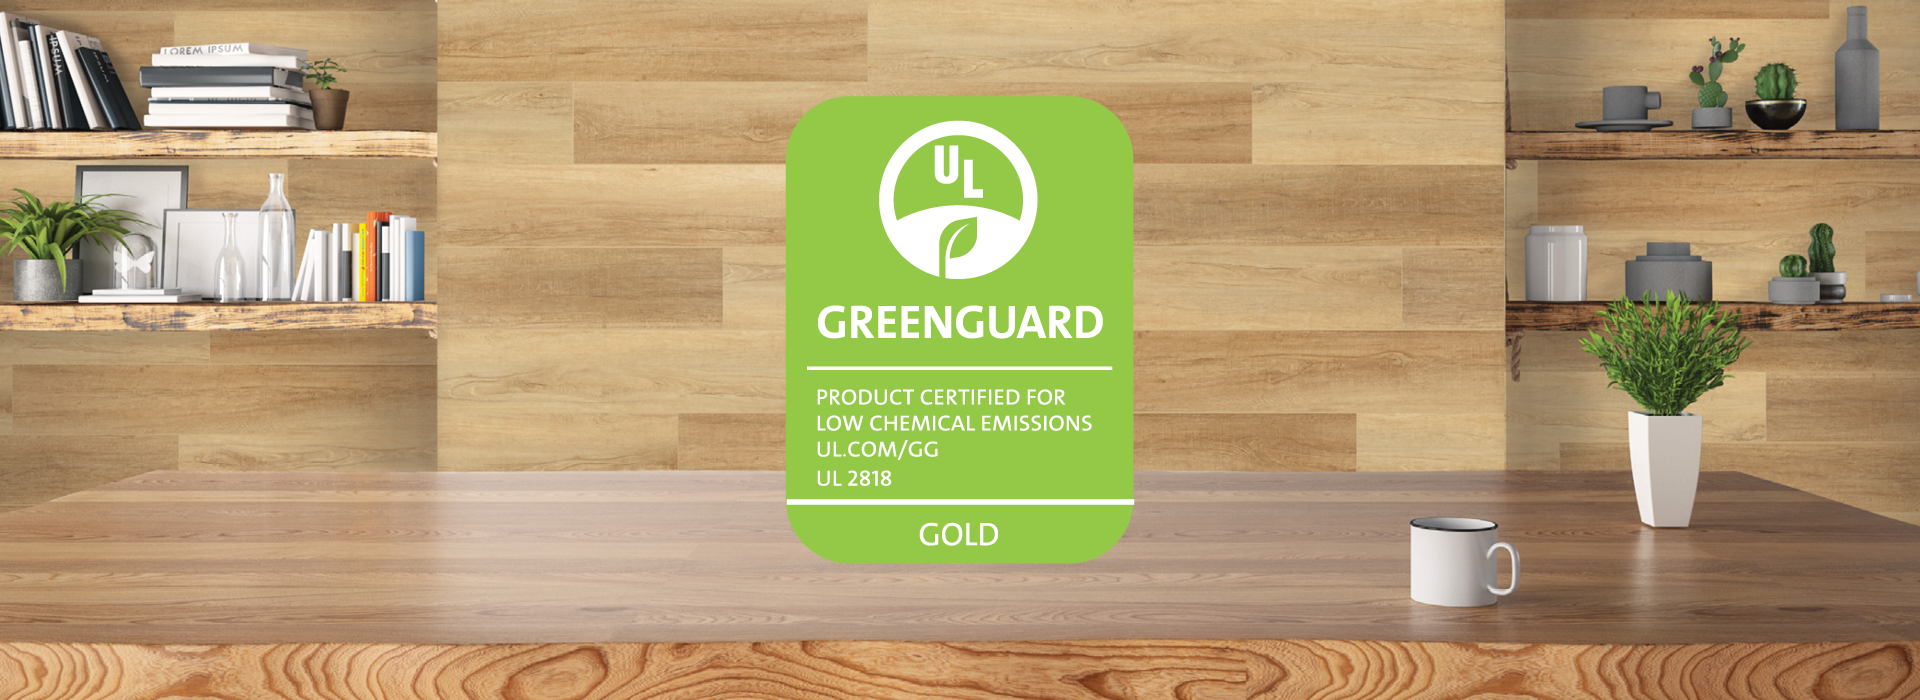 Wooden desk and the GreenGuard logo